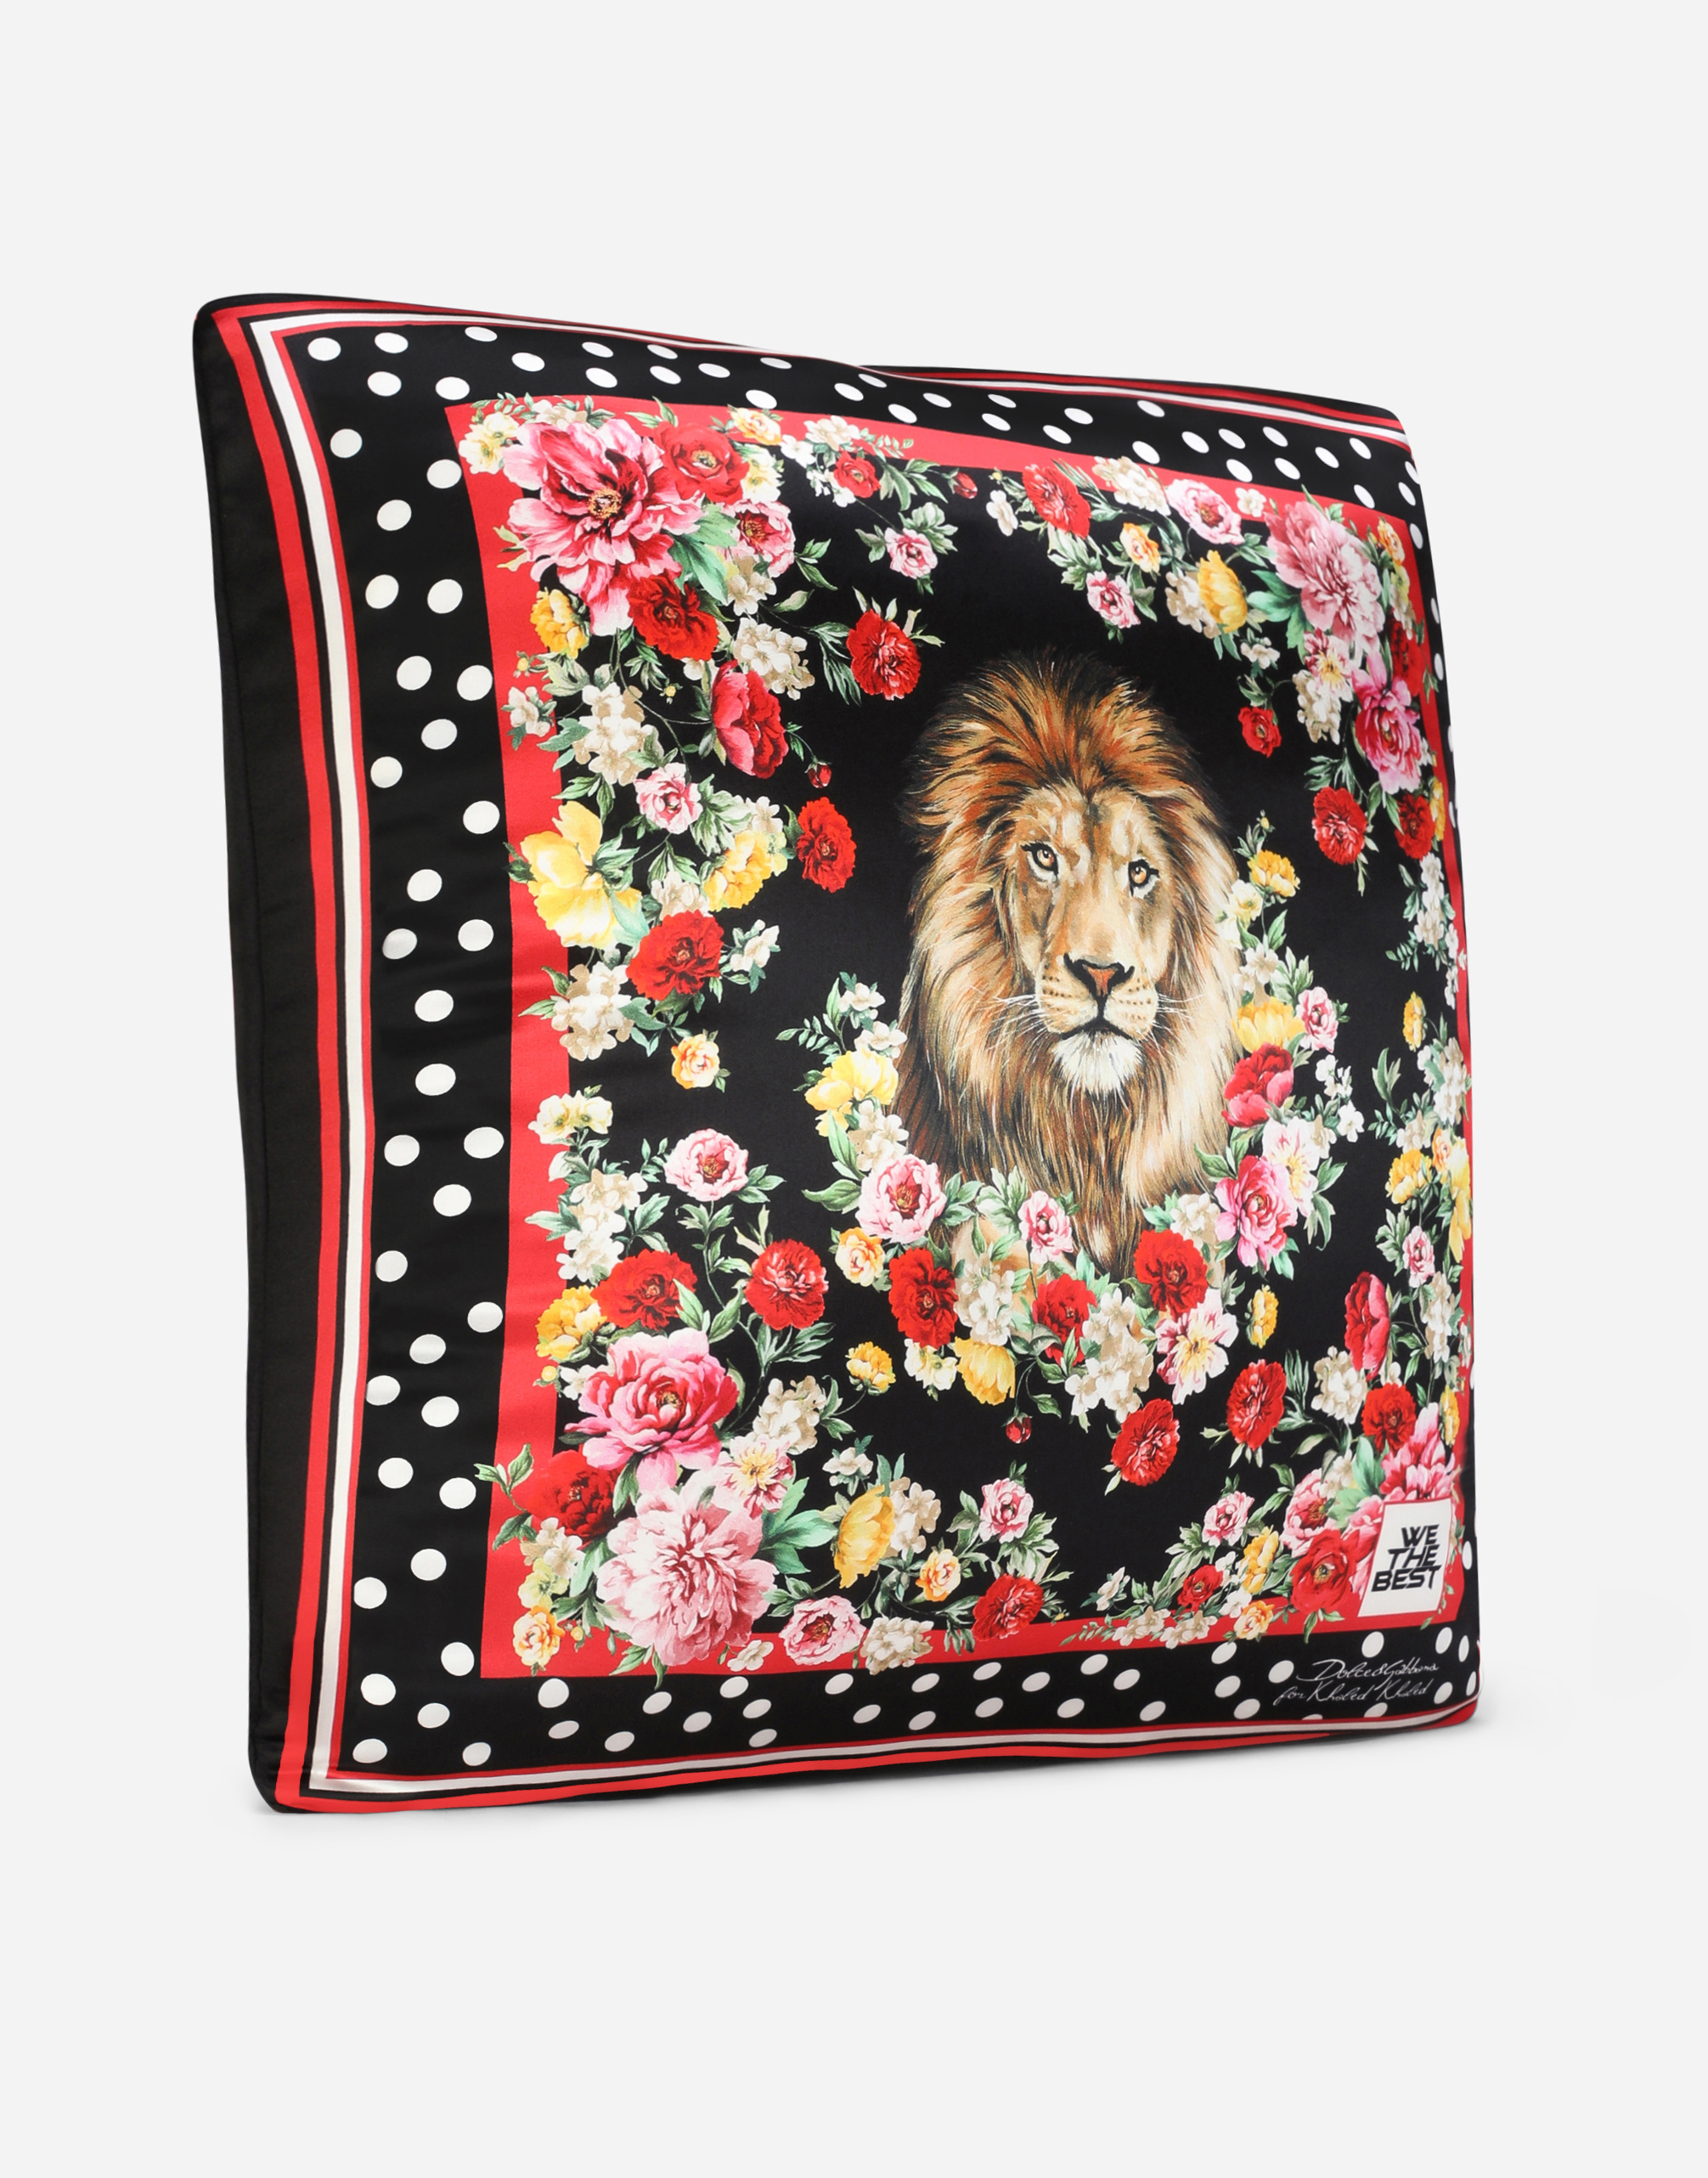 Printed silk pillow with lion mix embroidery in Multicolor